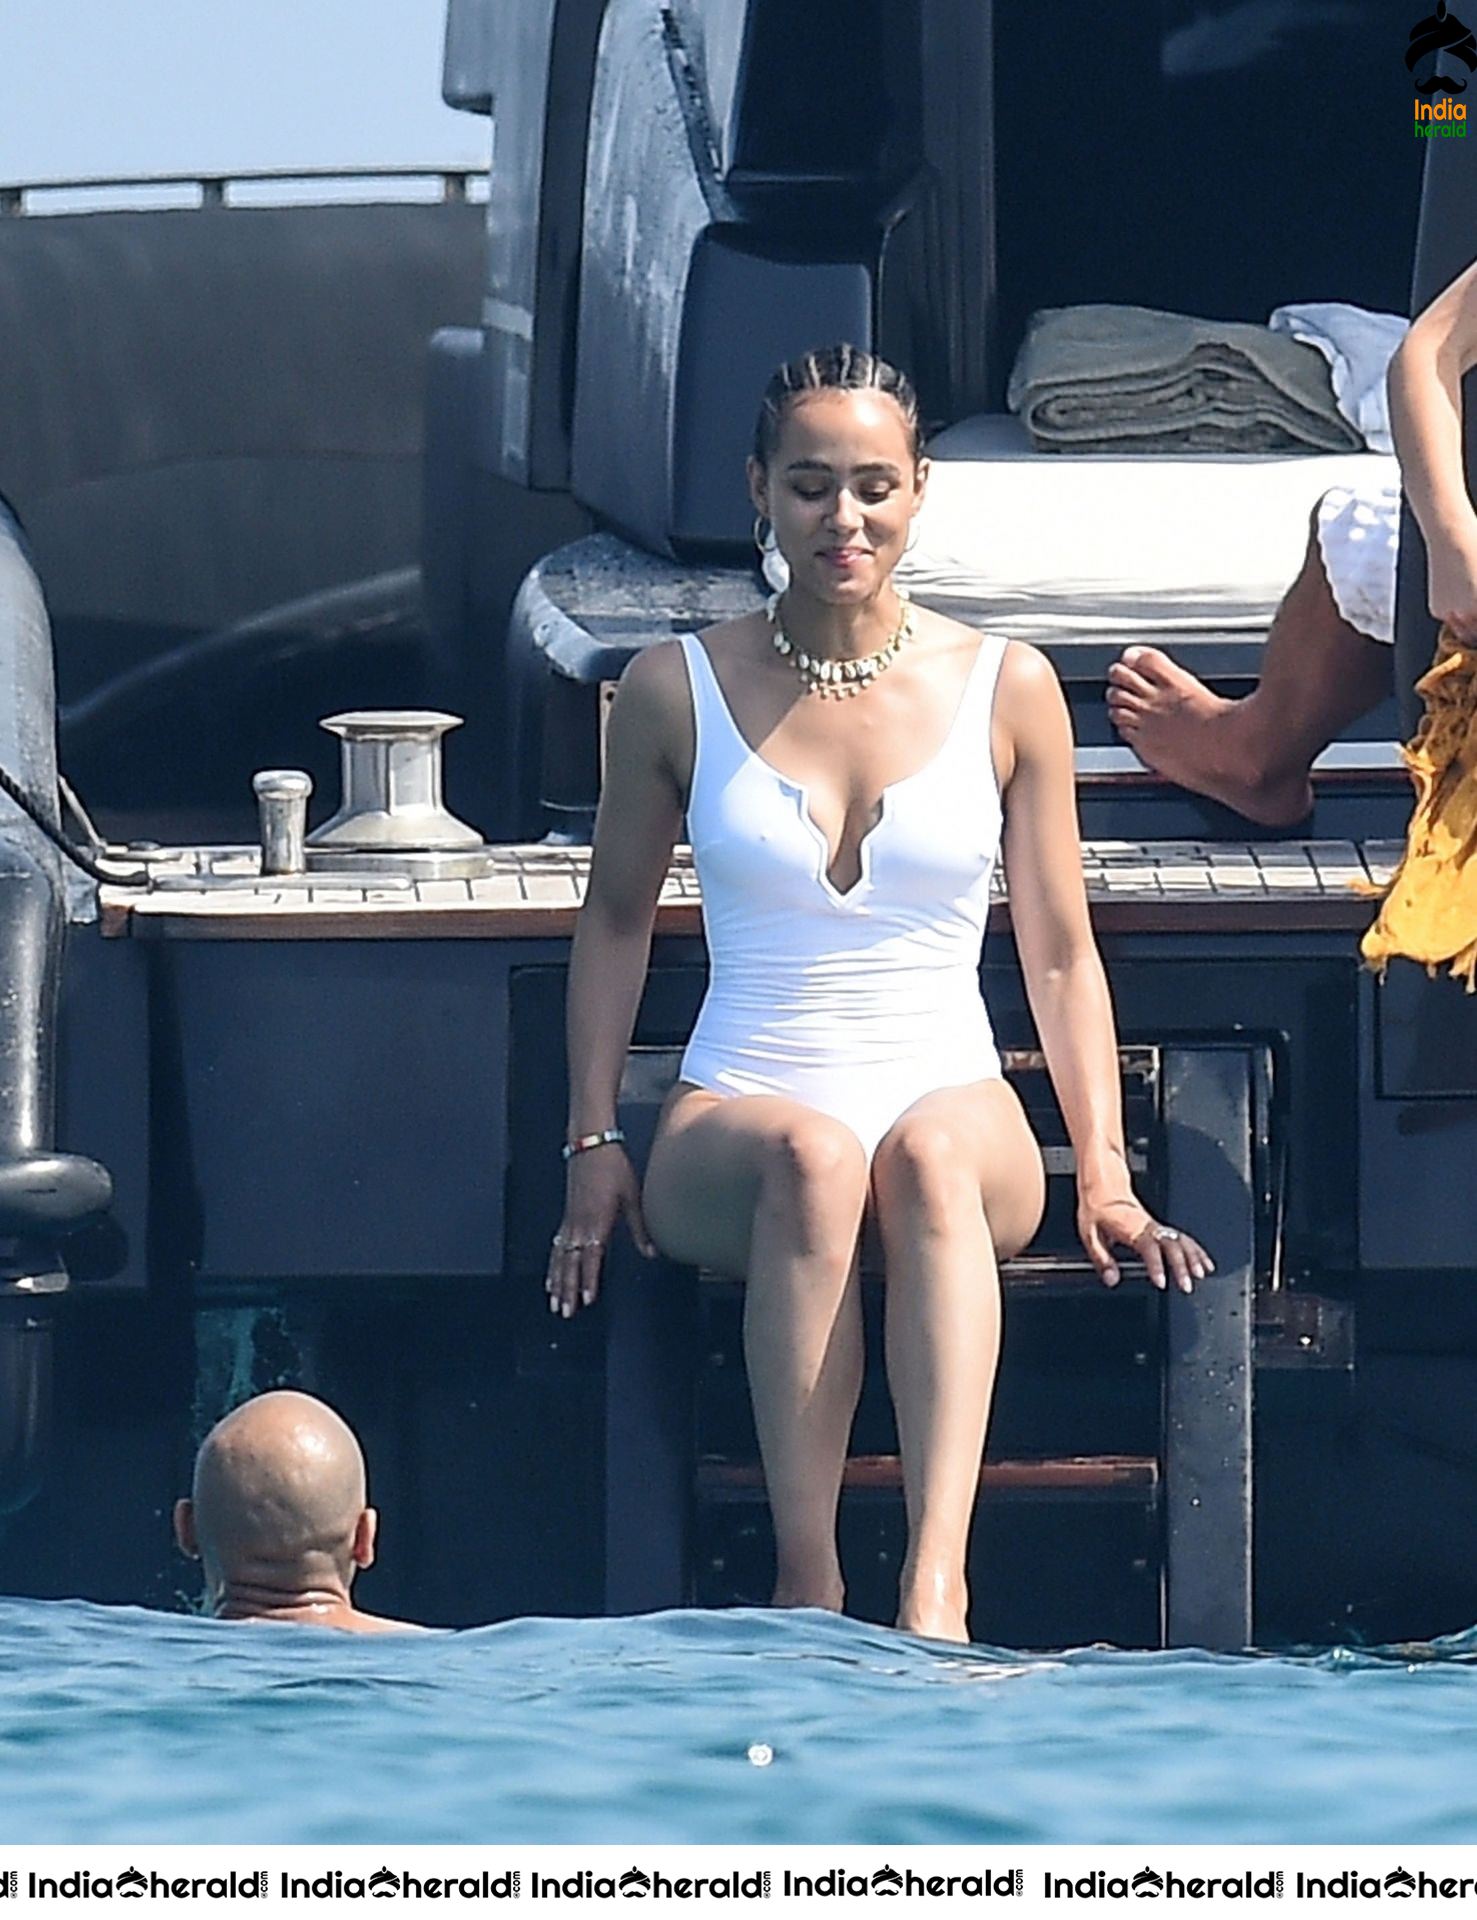 Nathalie Emmanuel wearing a white swimsuit while on vacation in Italy